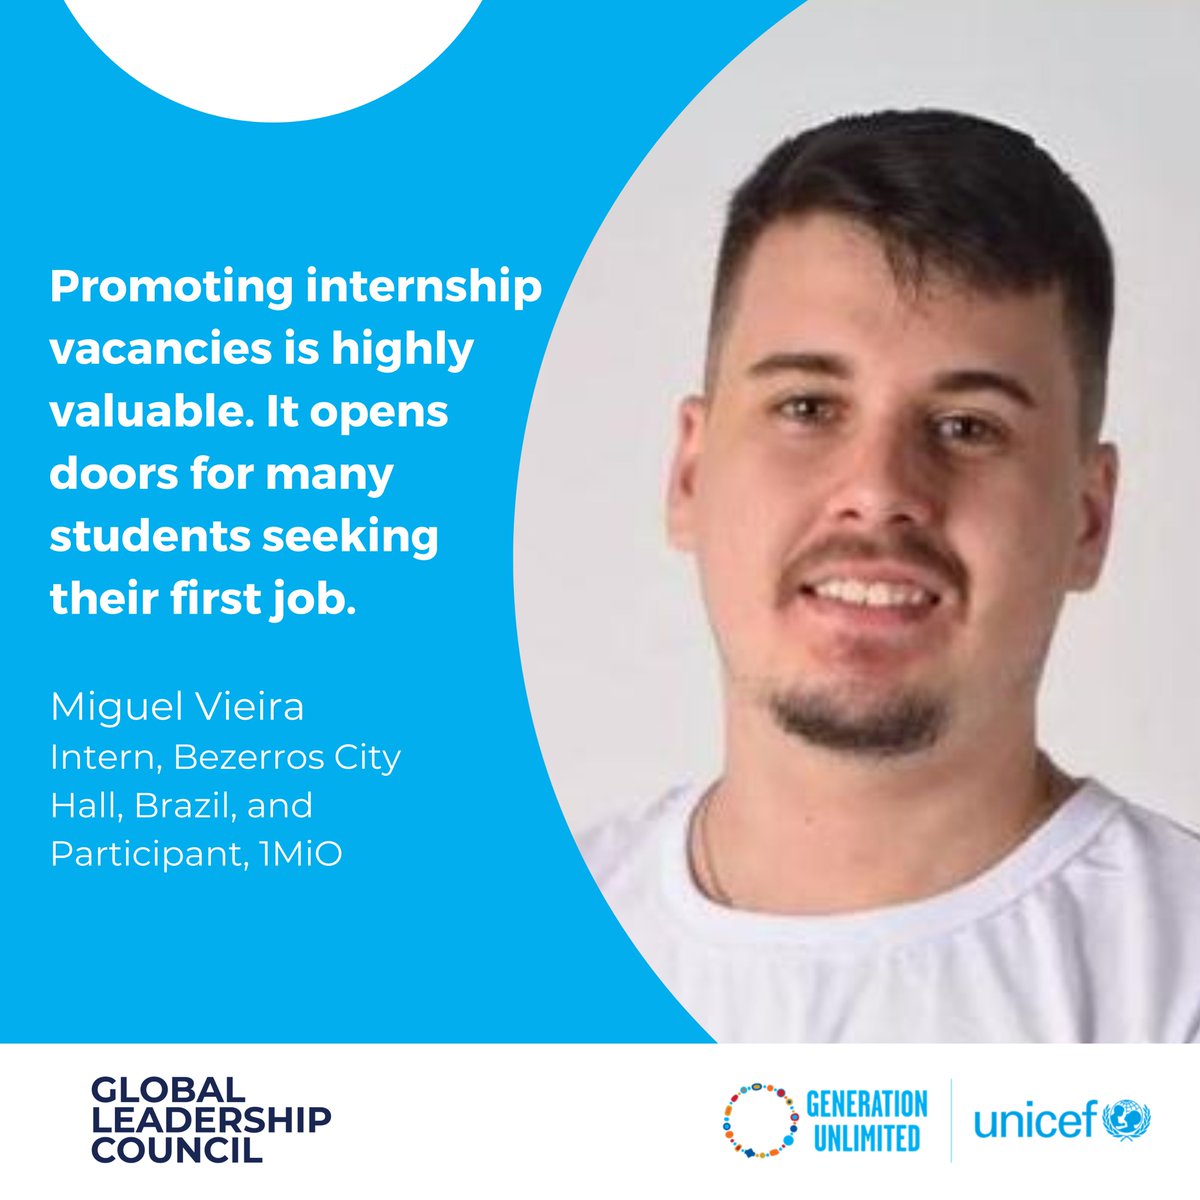 Miguel secured his first internship through #1MiO, paving his professional journey. 'I'm developing professionally and learning teamwork.' 1MiO creates opportunities for education, digital skills, & work for youth. Together, @UNICEFBrasil + @GenUnlimited_ drive this initiative.